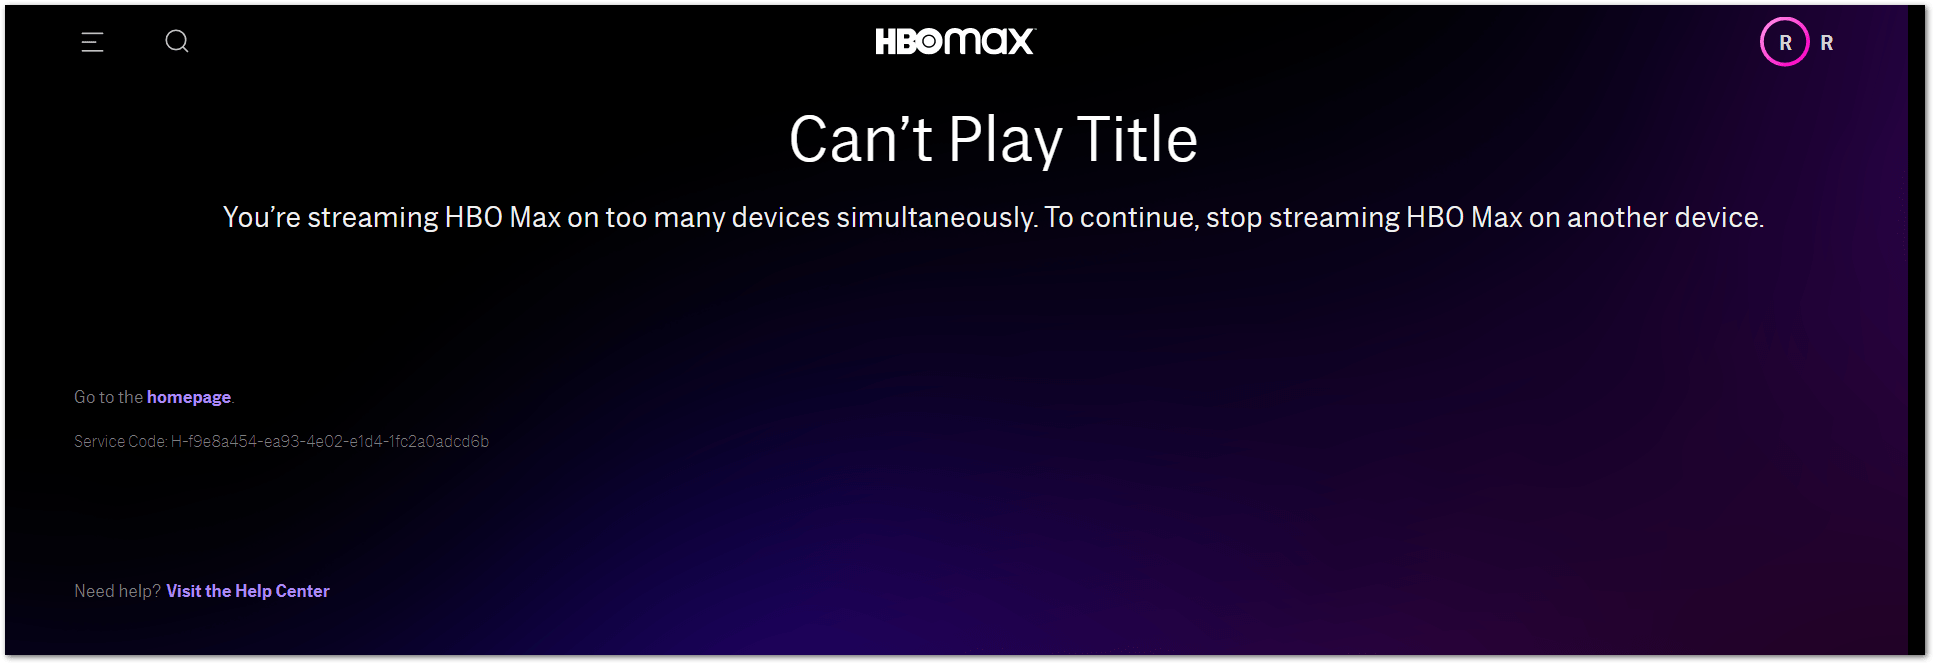 HBO Max can't play title because you're streaming on too many devices error